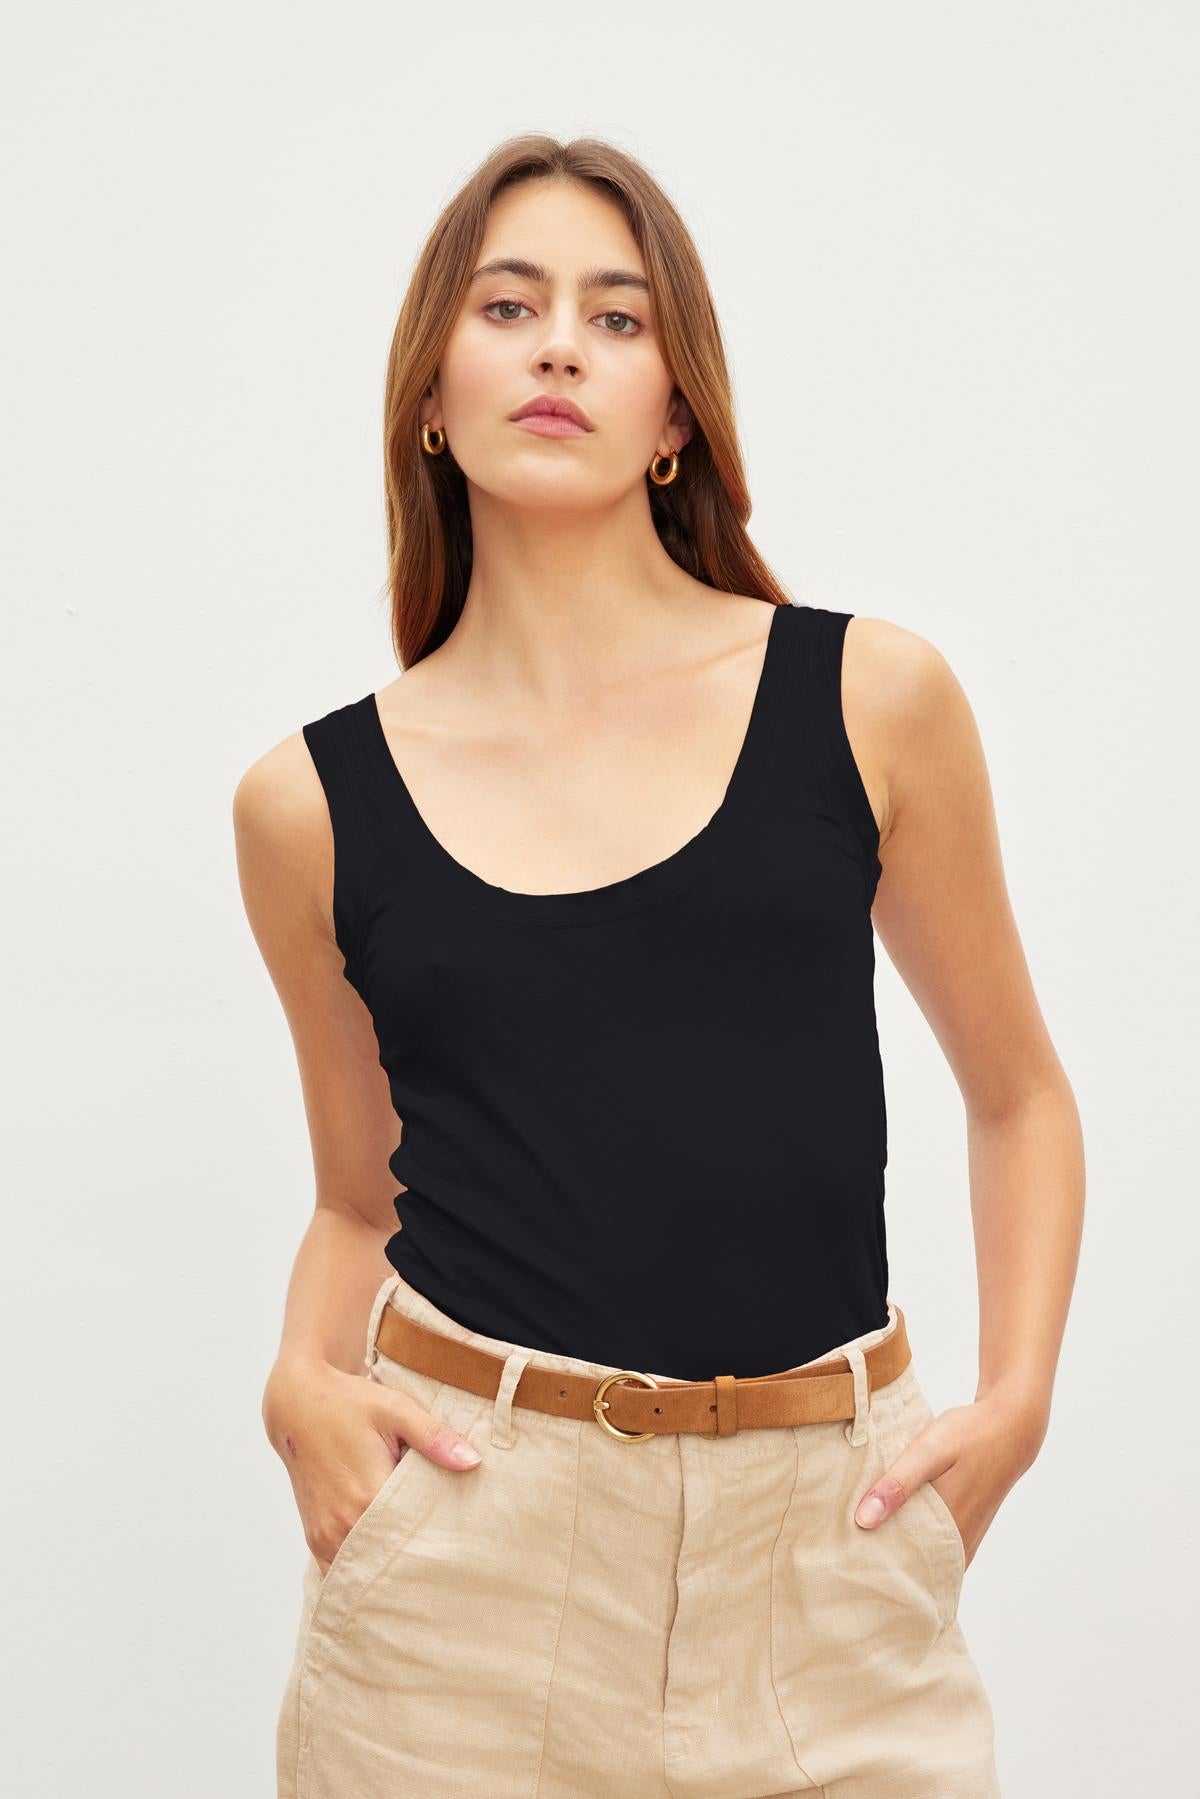 A young woman in a Velvet by Graham & Spencer MOSSY GAUZY WHISPER FITTED TANK and beige trousers with a brown belt, standing against a plain background.-36454076481729